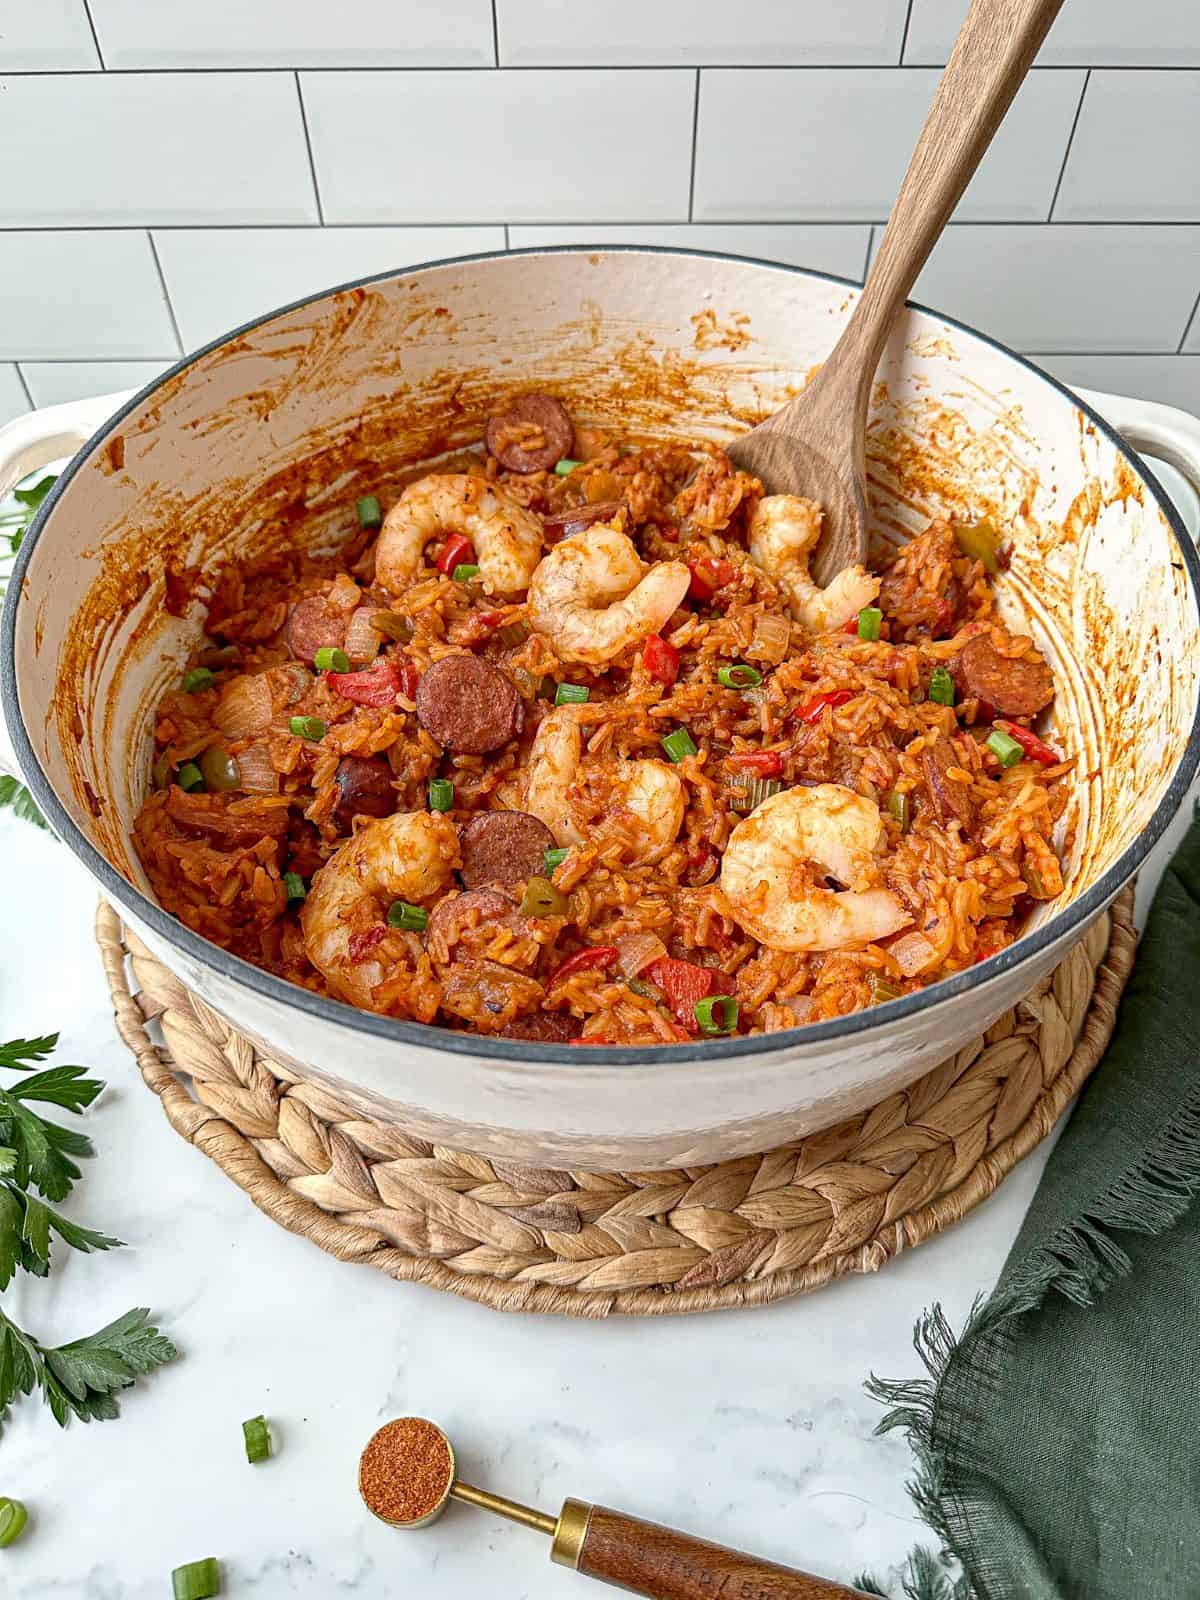 Sausage and shrimp jambalaya in a large white pot with a wooden spoon.